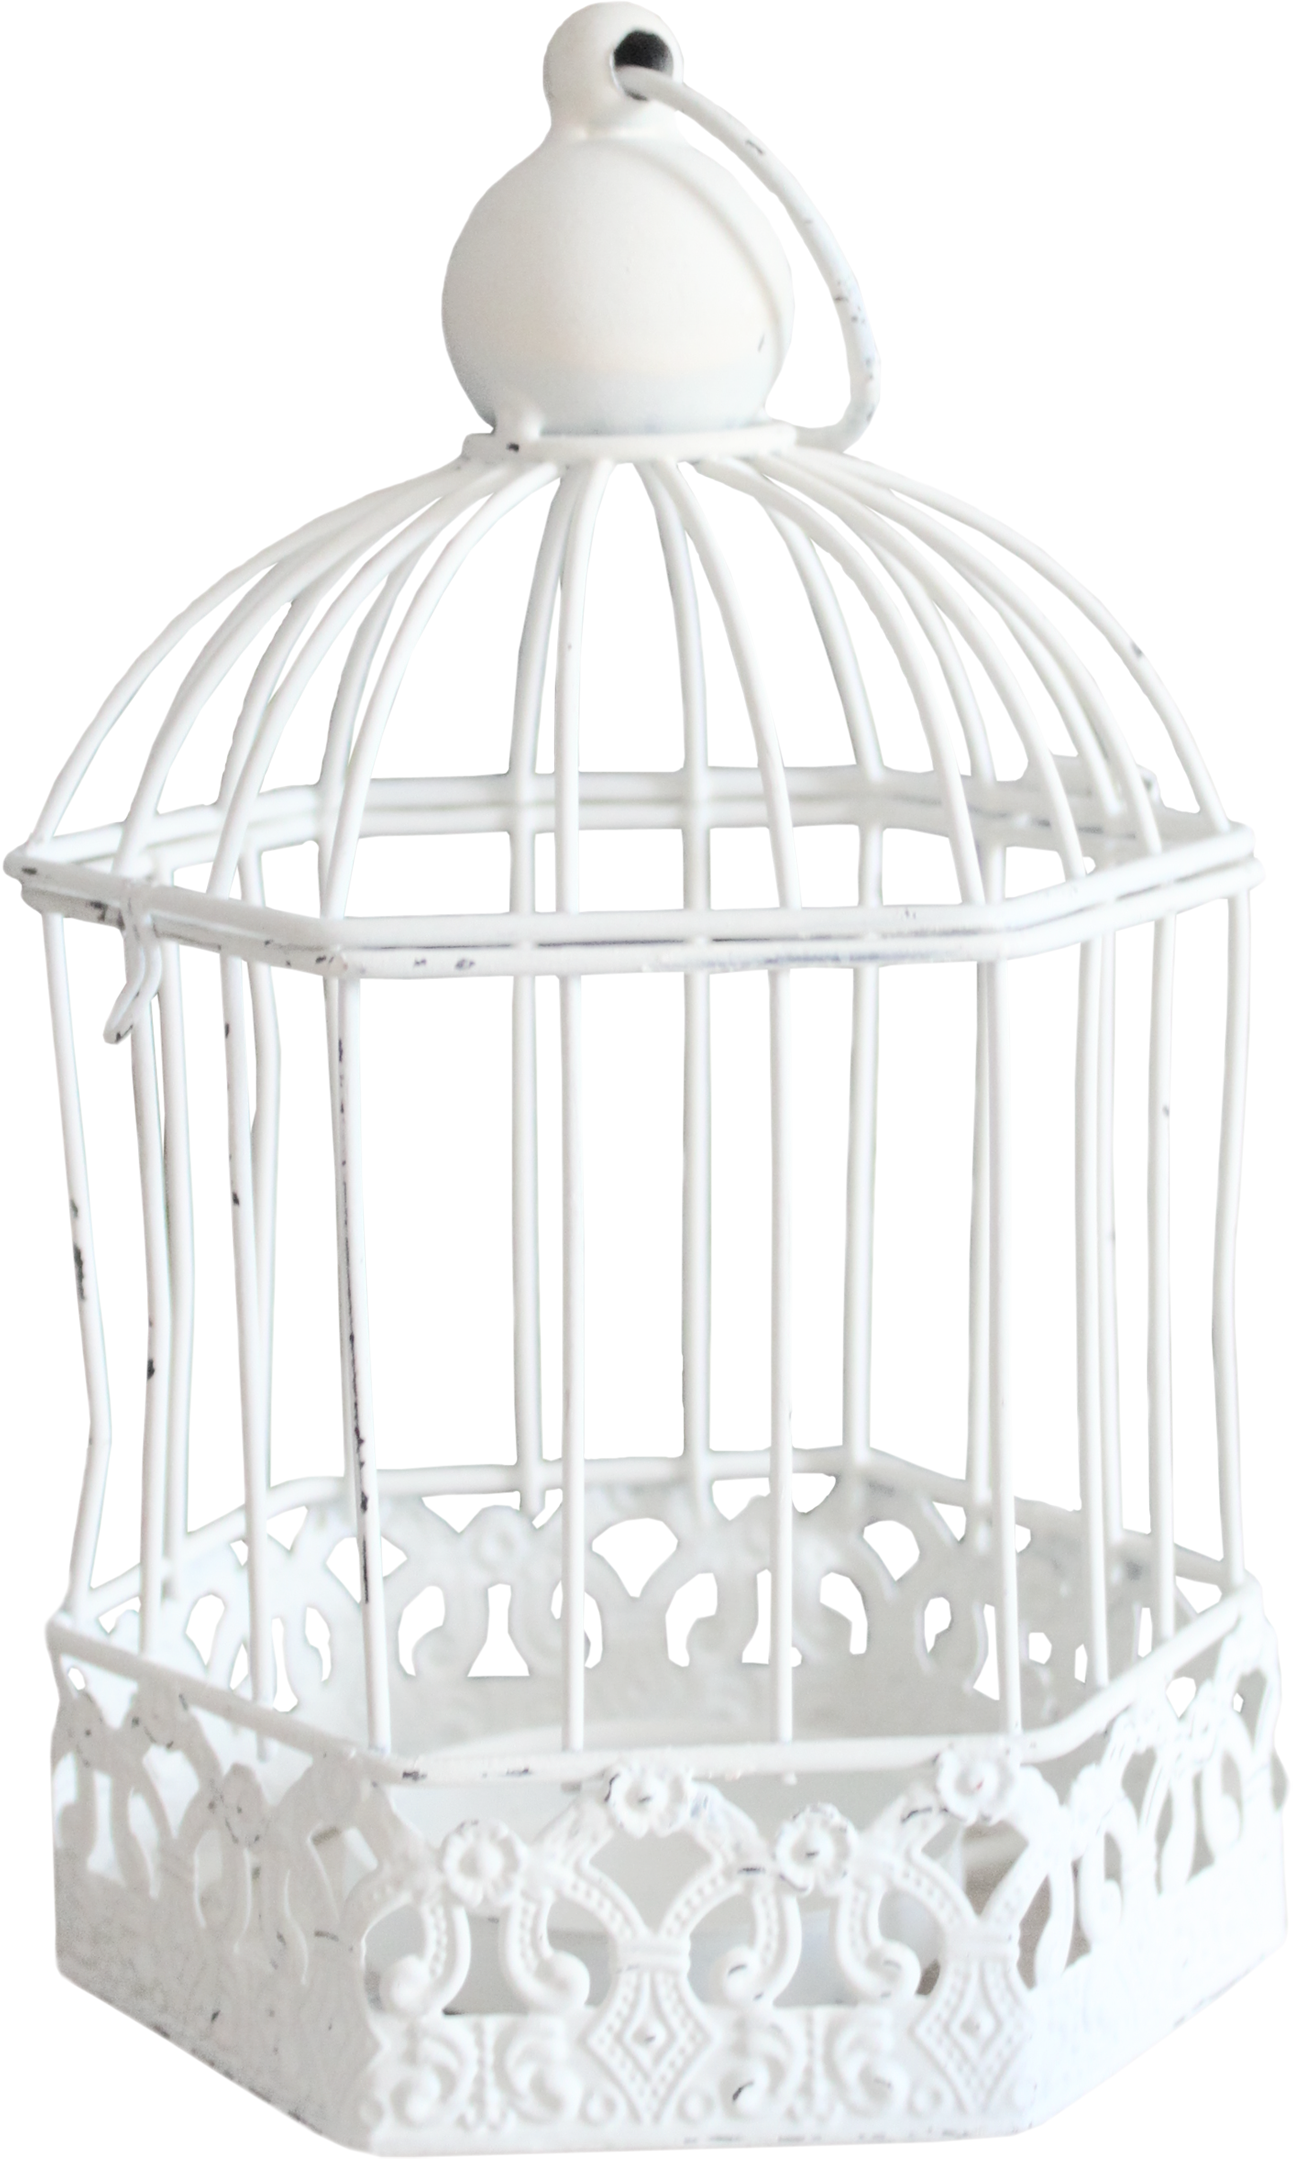 Cage PNG images Download 